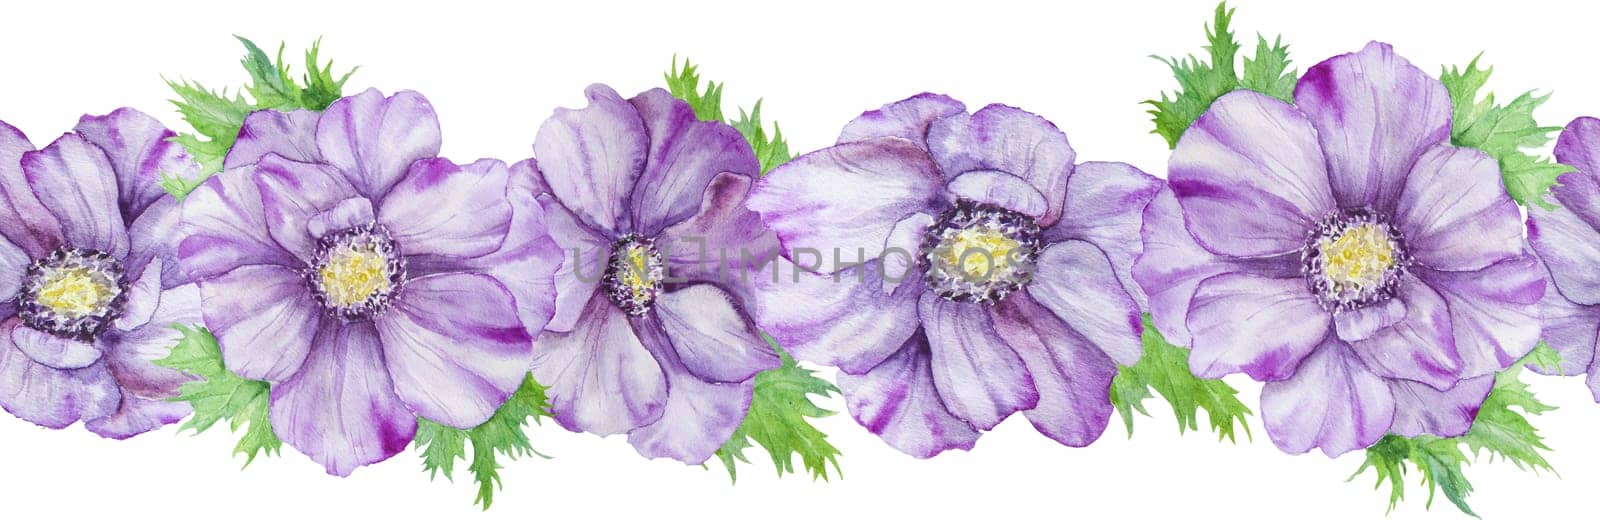 Hand drawn watercolor seamless border of purple anemones with green leaves. Spring compositioin for wedding invitations, greeting cards by florainlove_art